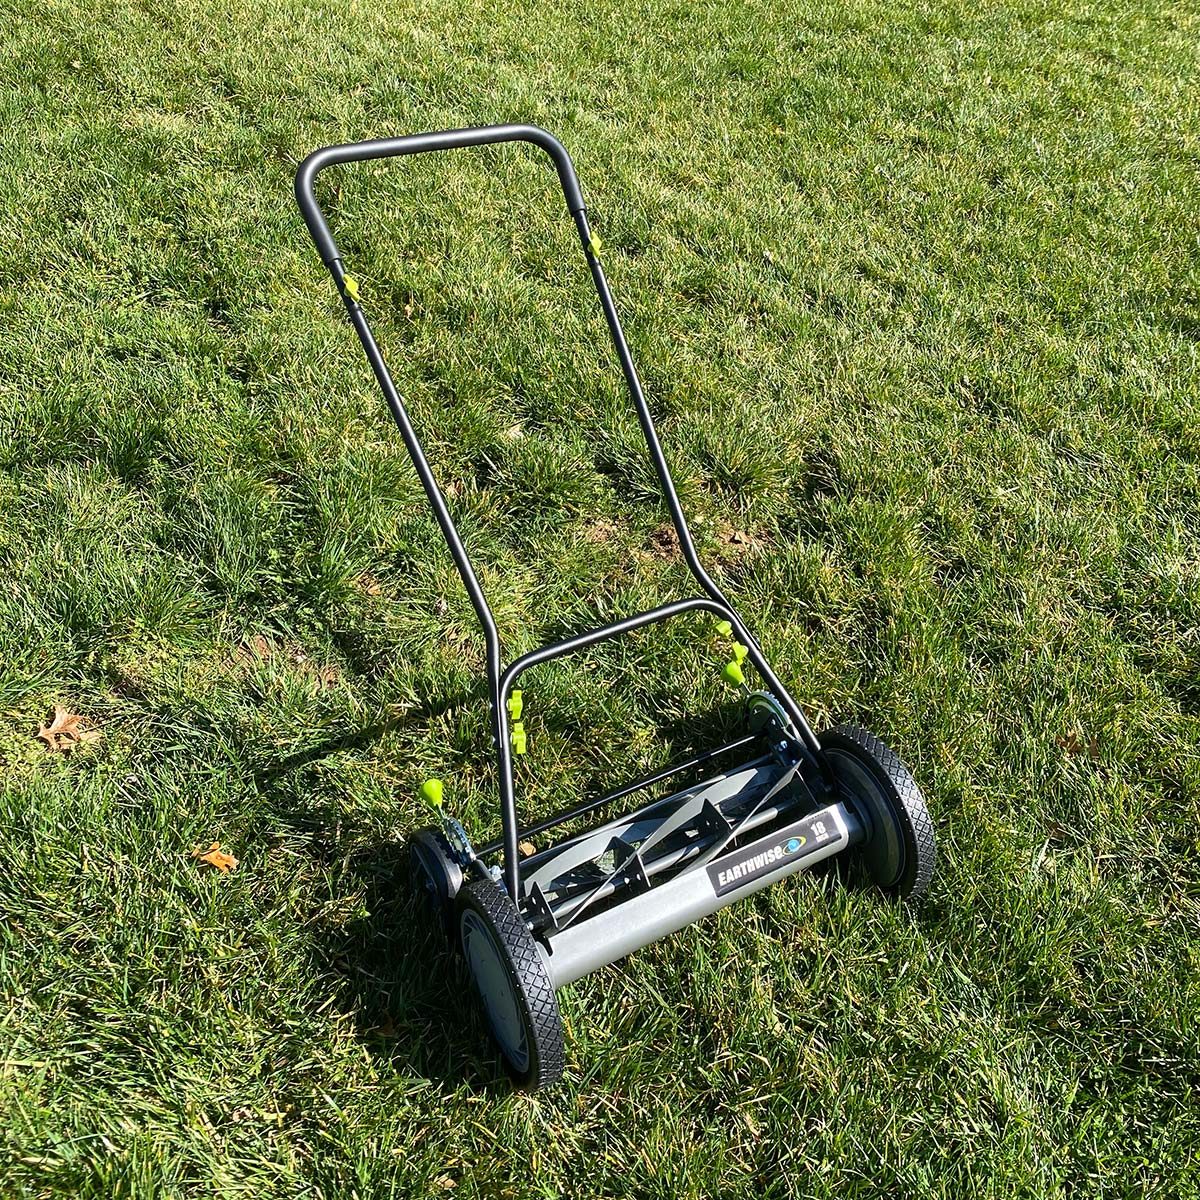 <h3>Earthwise 18-inch 5-Blade Push Reel Lawn Mower</h3> <p>Summer grasses like Zoysia, Bermuda and St. Augustine require more frequent cutting and are maintained at shorter lengths, around 1.5 inches to 2 inches. Compare this height with tall fescue, where the ideal height is about 3.5 to 4 inches.</p> <p>Reel mowers are great for shorter, <a href="https://www.familyhandyman.com/article/what-to-know-about-turf-grass/">warm-season grasses</a> because they can finely chop the grass clippings and put them back into your yard—all while maintaining a clean appearance. The <a href="https://www.amazon.com/Earthwise-1816-18EW-18-Inch-5-Blade-Mower/dp/B01DCPV2GK/" rel="noopener">Earthwise 18-inch reel mower</a> is designed to reach a cutting height of one inch. At this height, you are getting near surgical precision for your grass and can maintain it at the perfect one-inch height setting. The Earthwise has huge wheels with tires that have rubber coating but will not go flat, allowing you to dig further into your lawn and get the traction you need for an effortless cut.</p> <p><strong>Pros</strong></p> <ul> <li>Low cutting height capability</li> <li>Lightweight</li> <li>Rubber molded wheels</li> <li>Simple height adjustment</li> </ul> <p><strong>Cons</strong></p> <ul> <li>Handle is a bit wobbly</li> <li>Harder to get started pushing</li> </ul> <p class="listicle-page__cta-button-shop"><a class="shop-btn" href="https://www.amazon.com/Earthwise-1816-18EW-18-Inch-5-Blade-Mower/dp/B01DCPV2GK/">Shop on Amazon</a></p> <p class="listicle-page__cta-button-shop"><a class="shop-btn" href="https://www.northerntool.com/products/earthwise-reel-push-lawn-mower-18in-w-model-1816-18ew-51877">Shop on Northern Tool</a></p>